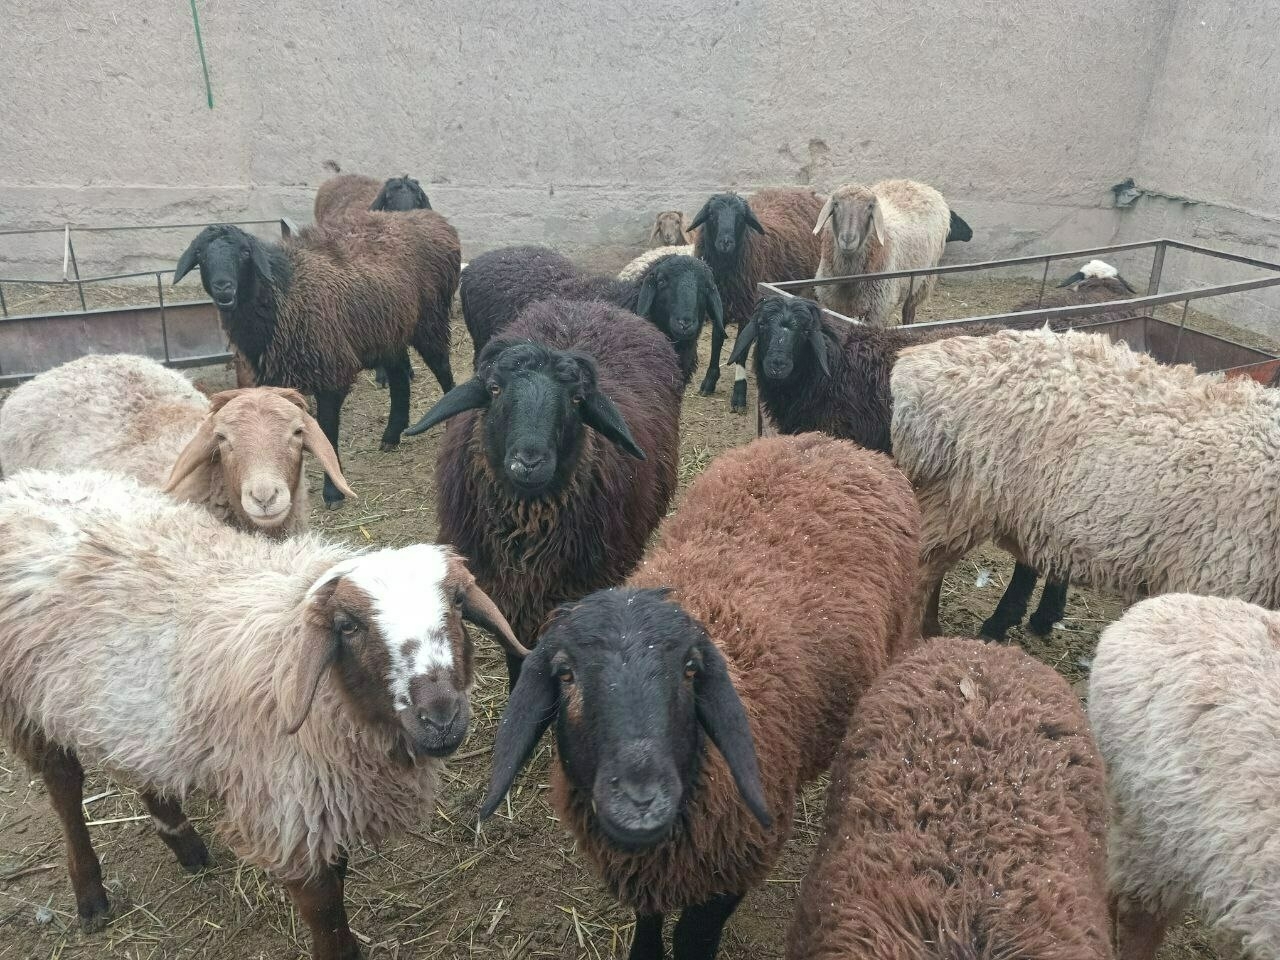 about 15 sheep of varying shades of brown and cream in an outdoor pen